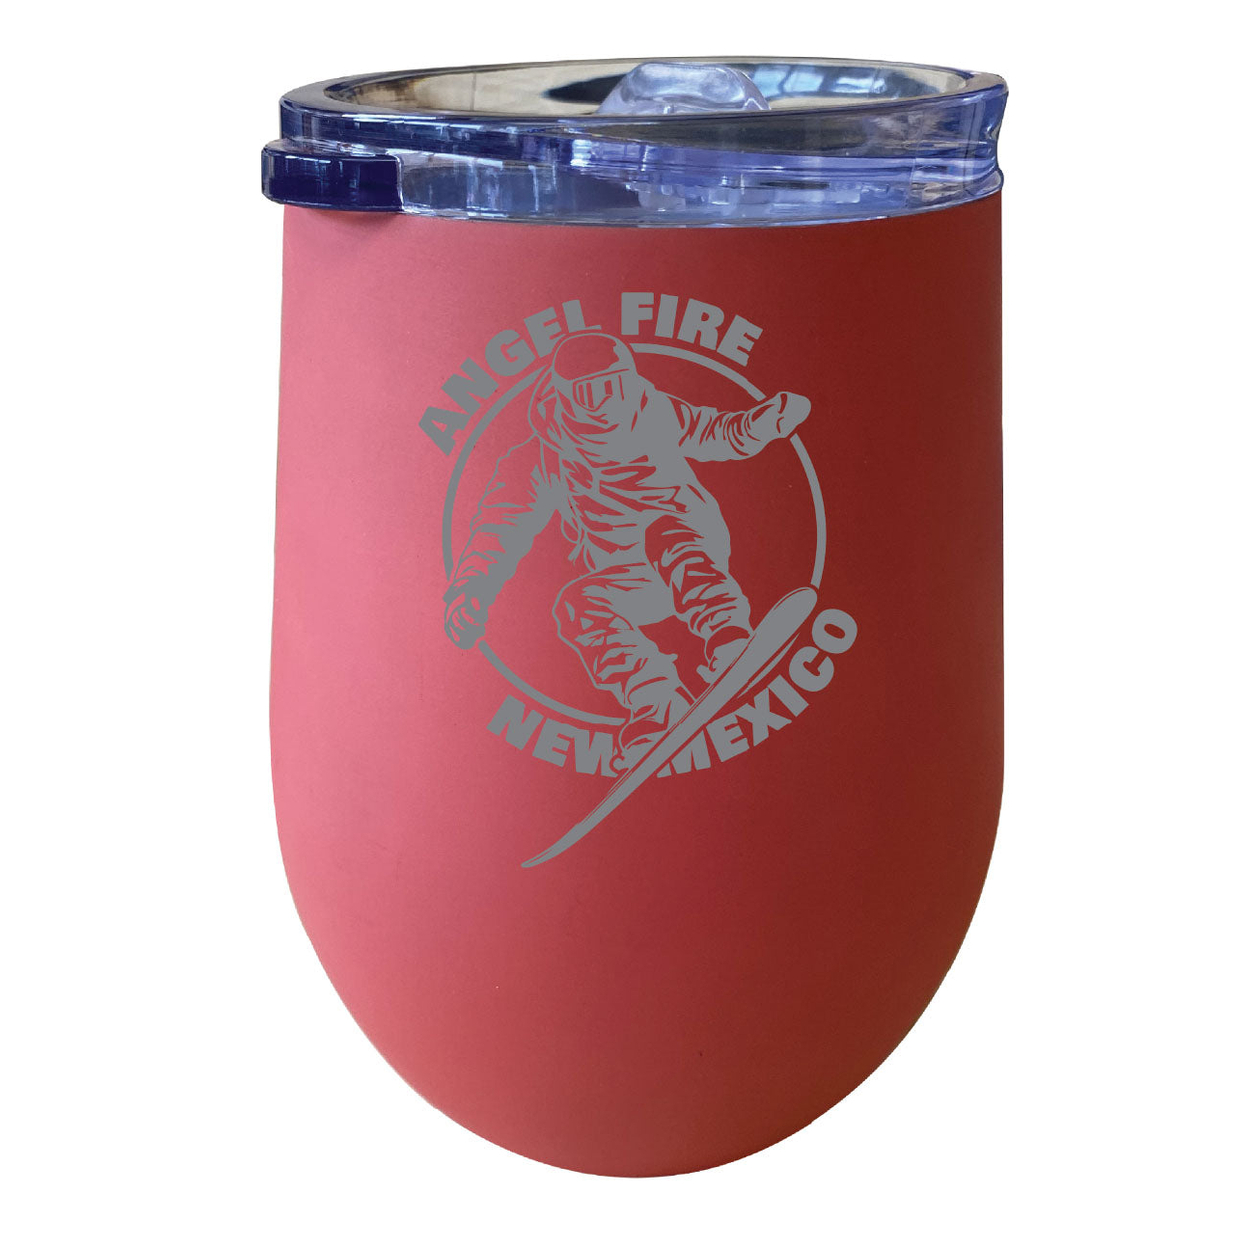 Angel Fire New Mexico Souvenir 12 Oz Engraved Insulated Wine Stainless Steel Tumbler - Coral,,4-Pack